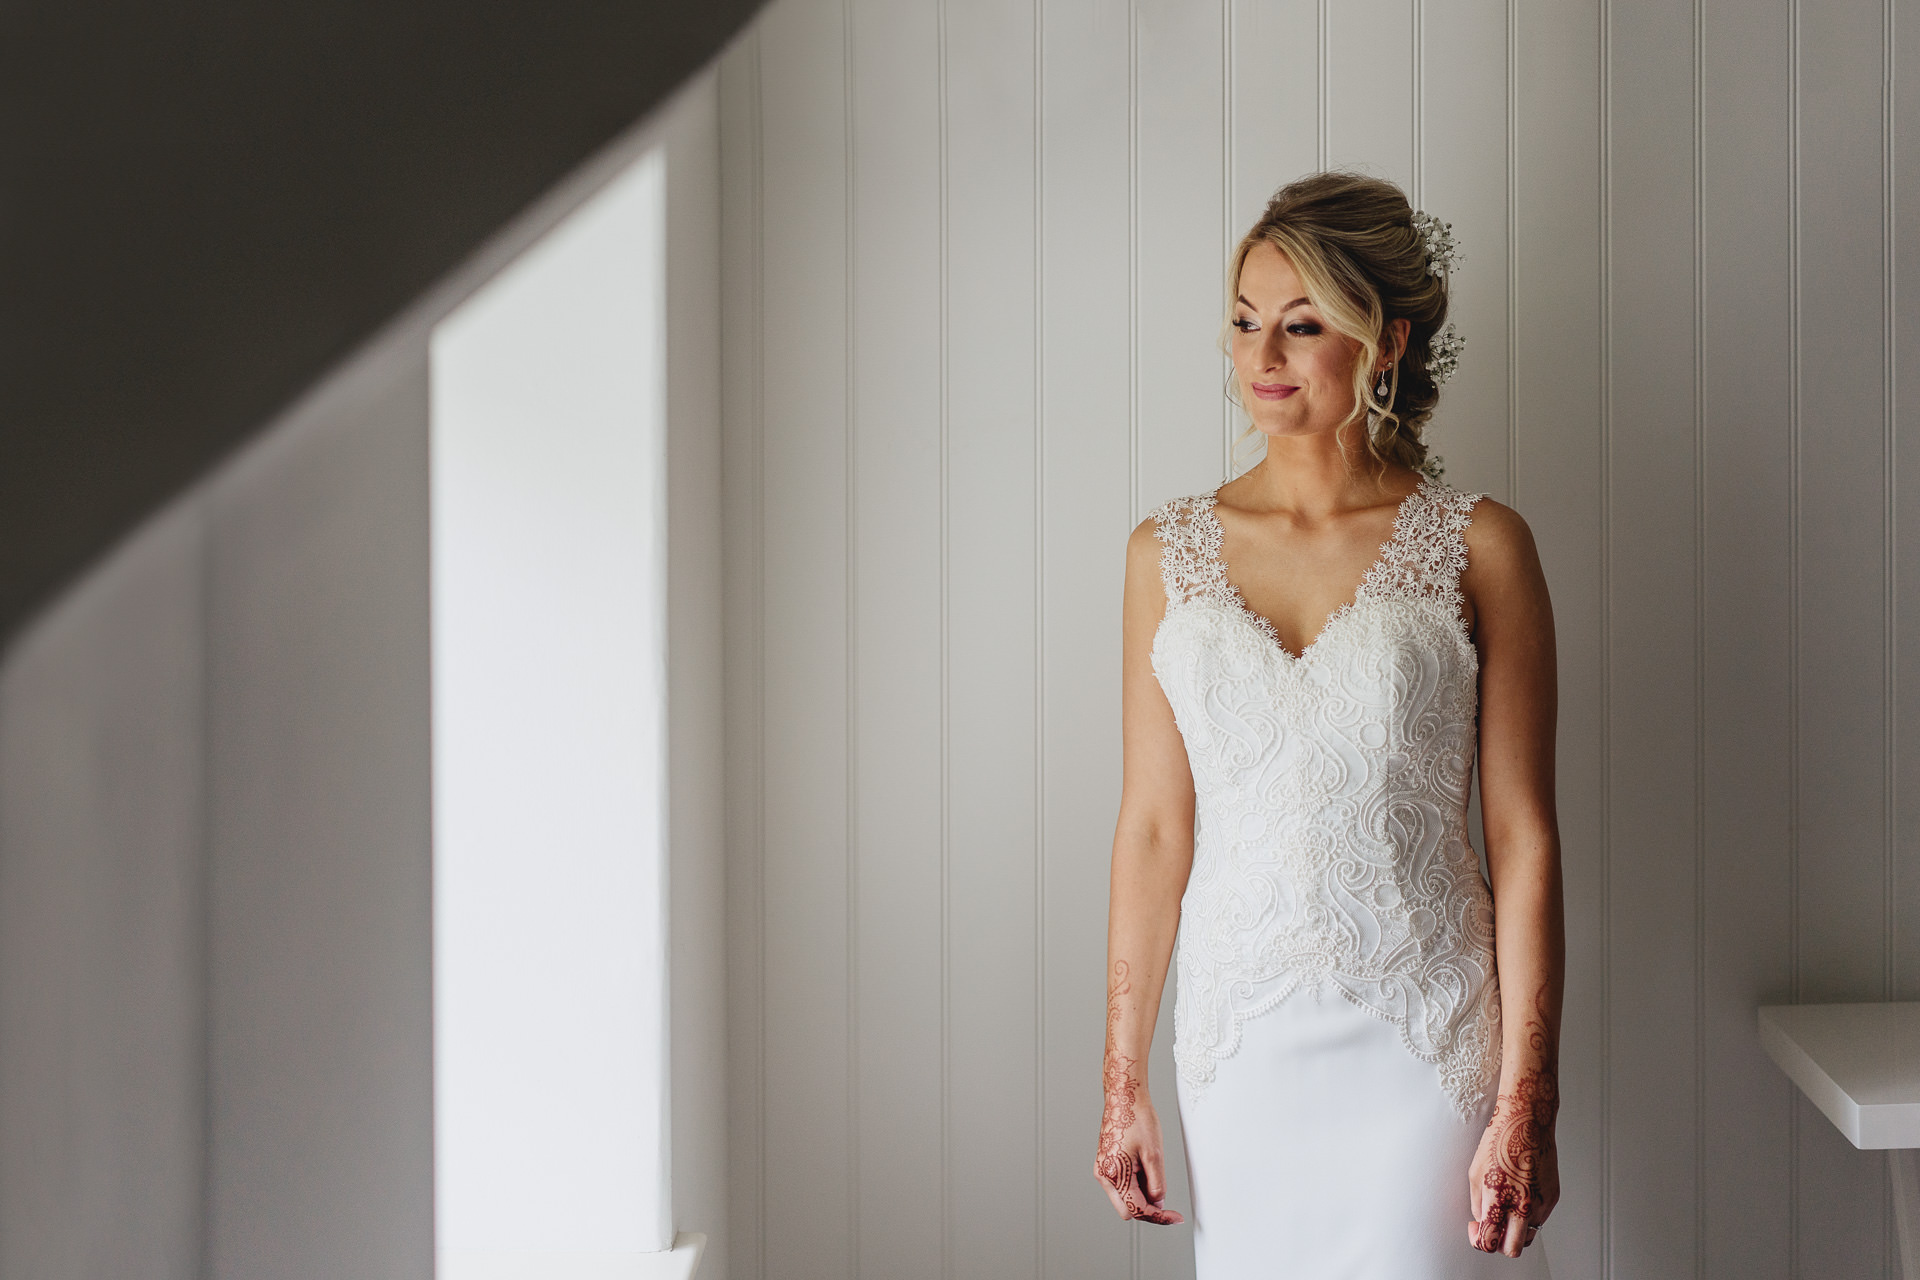 Bride ready for her wedding at The Great Barn, Devon